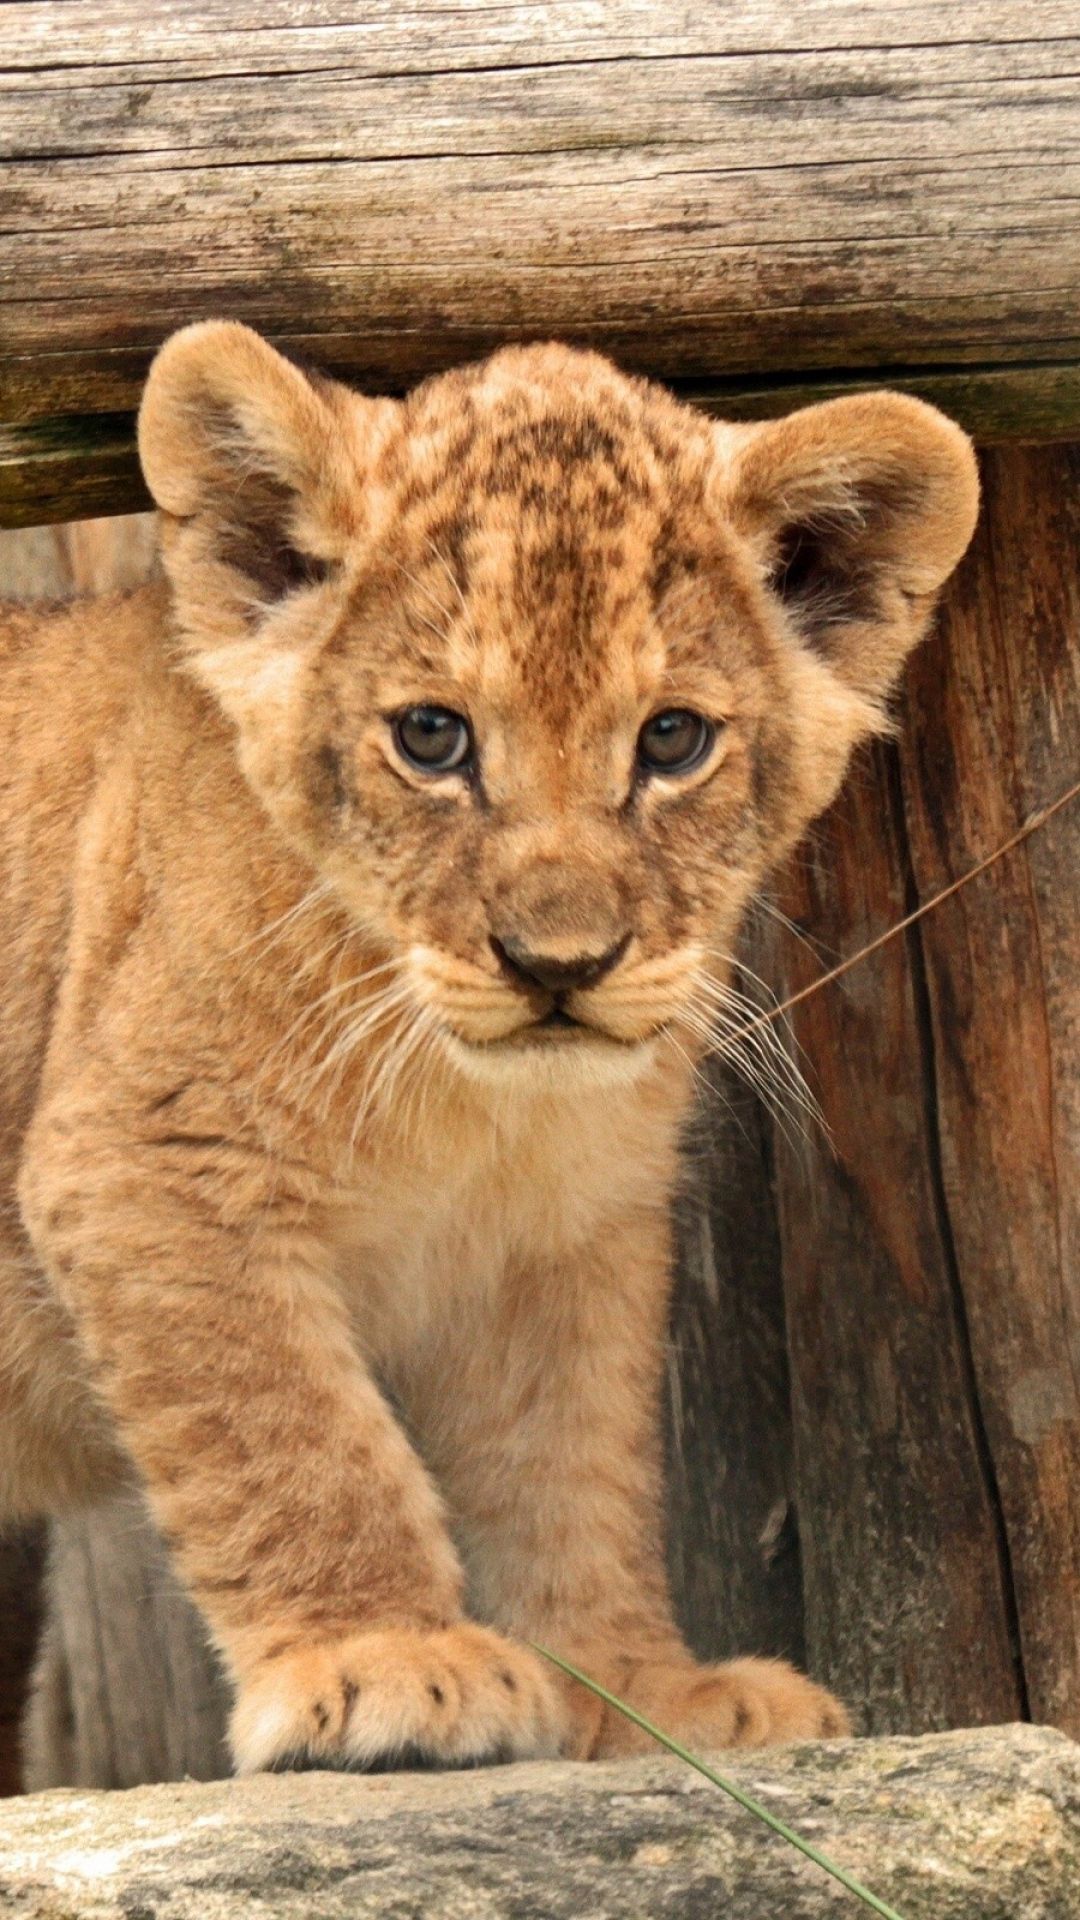 Lion cub htc one wallpaper, free and easy to download